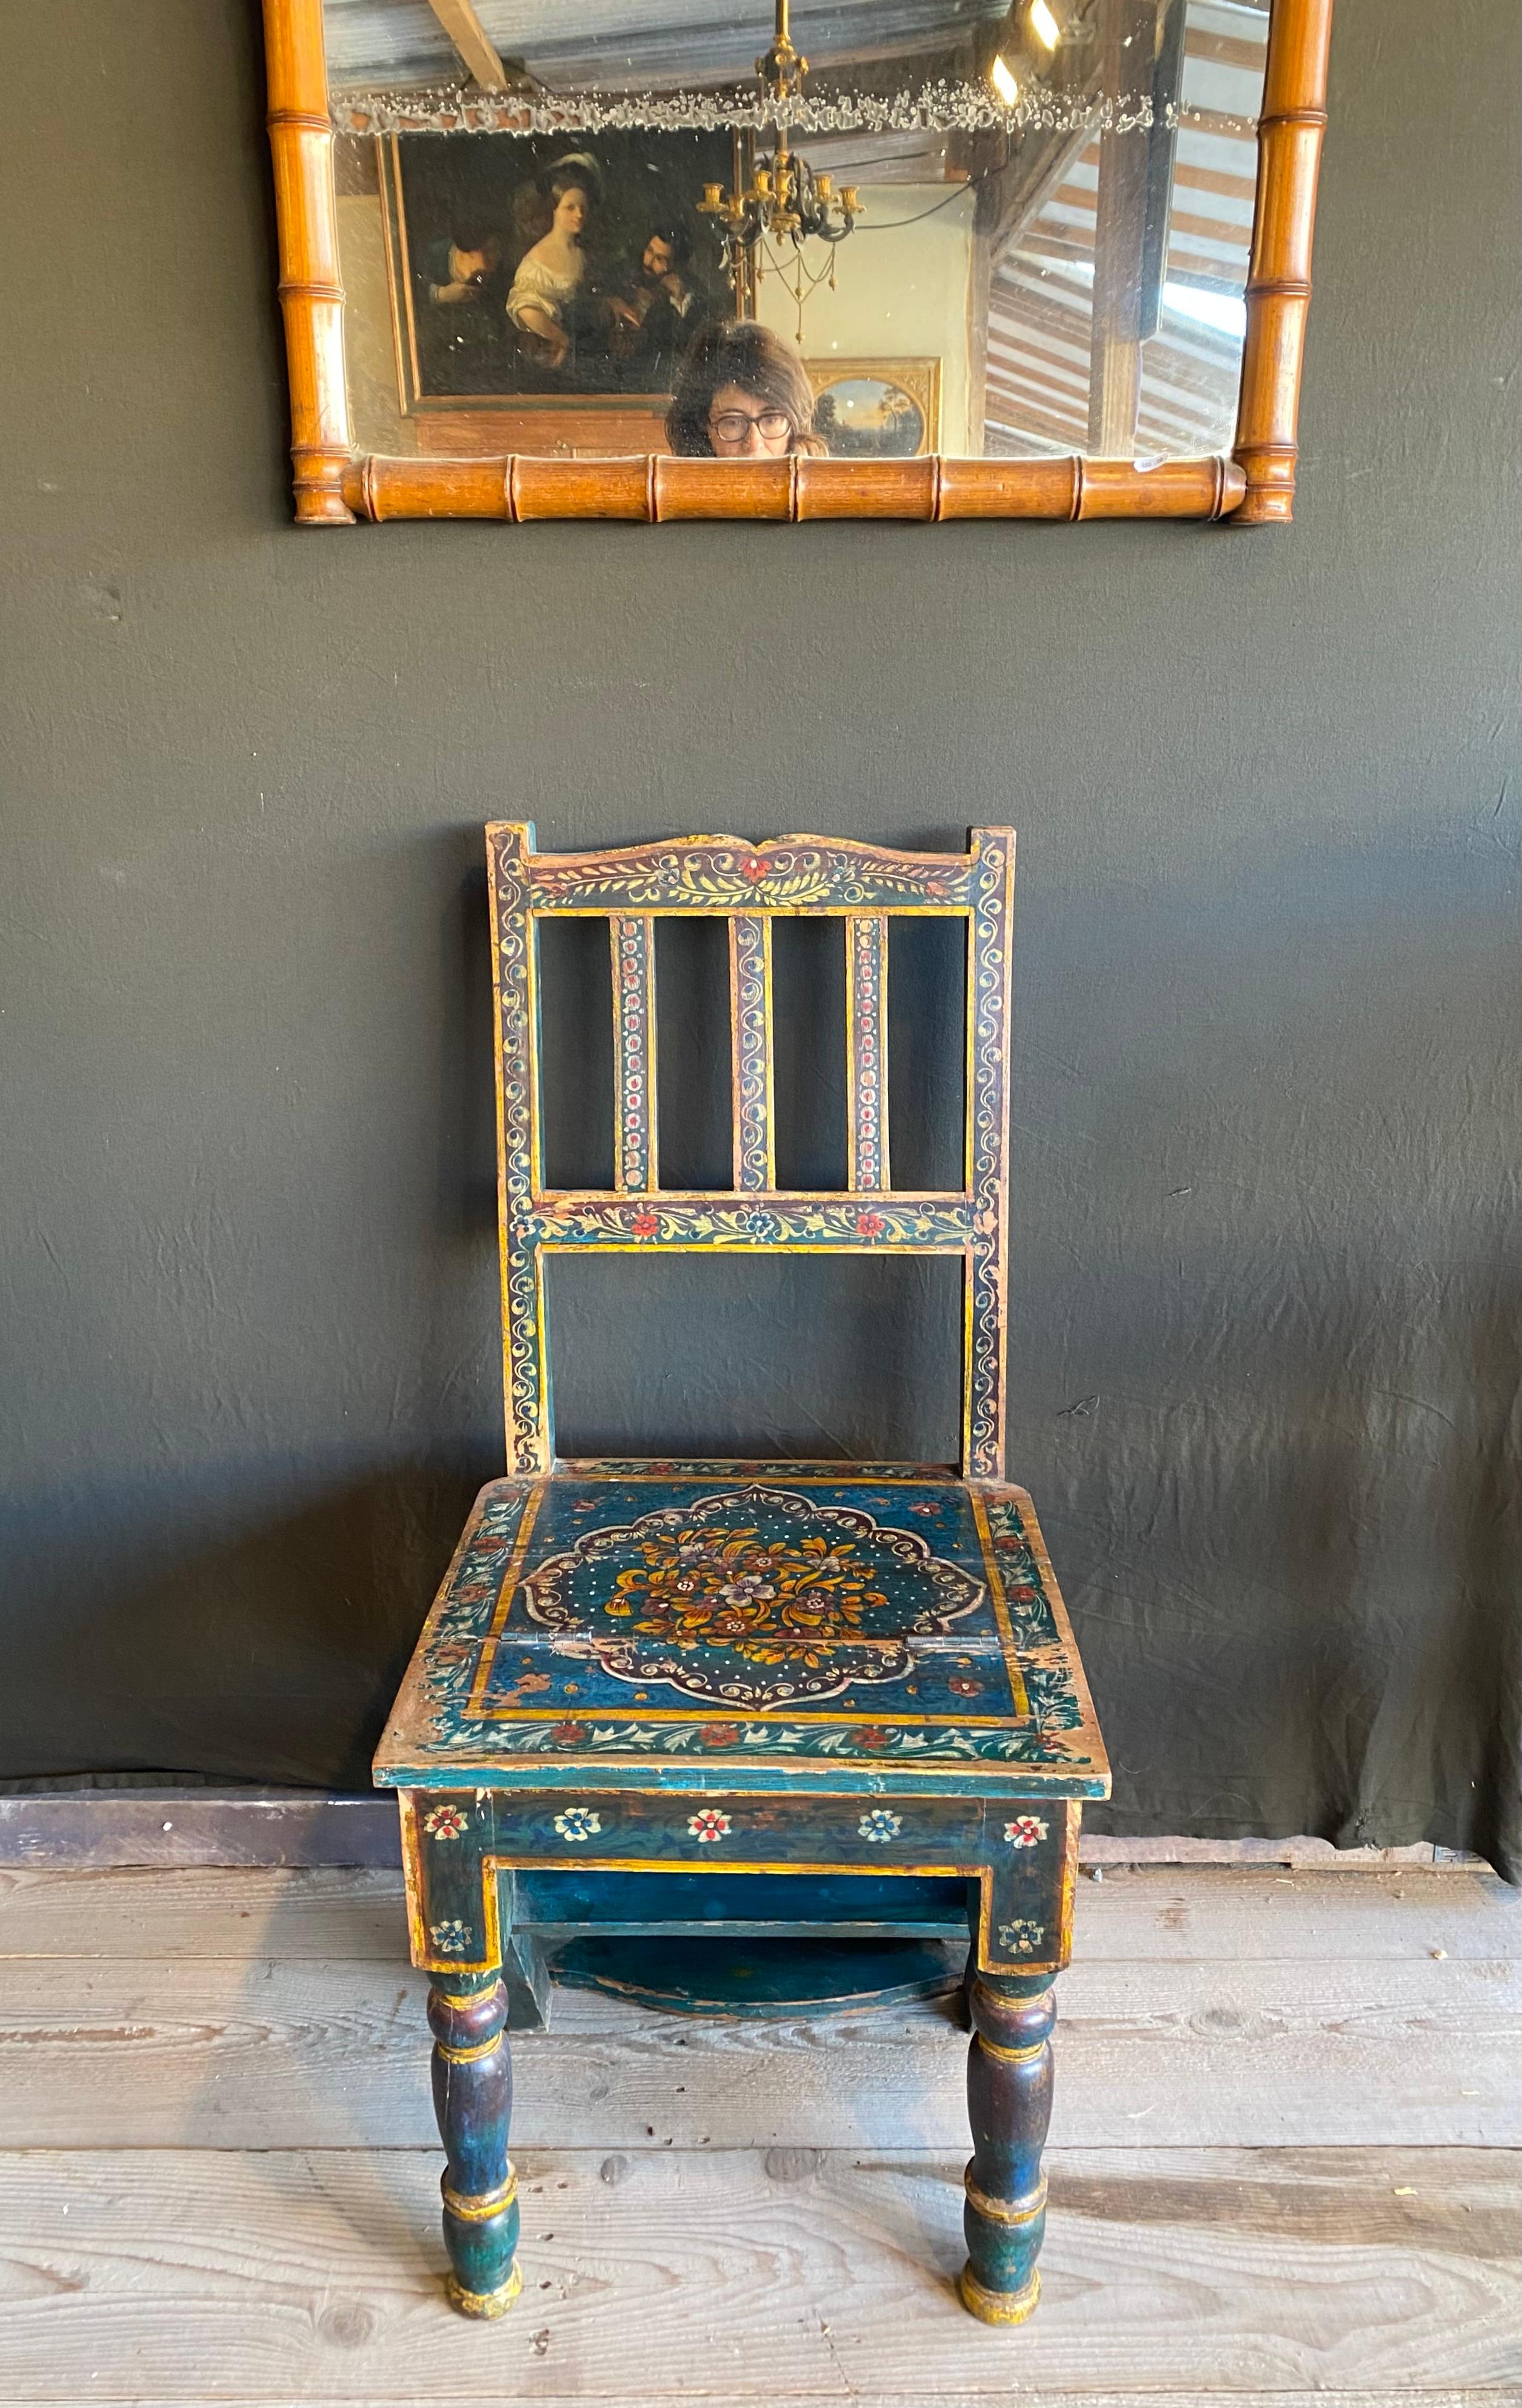 Delightful wooden hand painted chair 
It becomes a foot stool easily
Very good condition
Very Nice hand painted patterns 